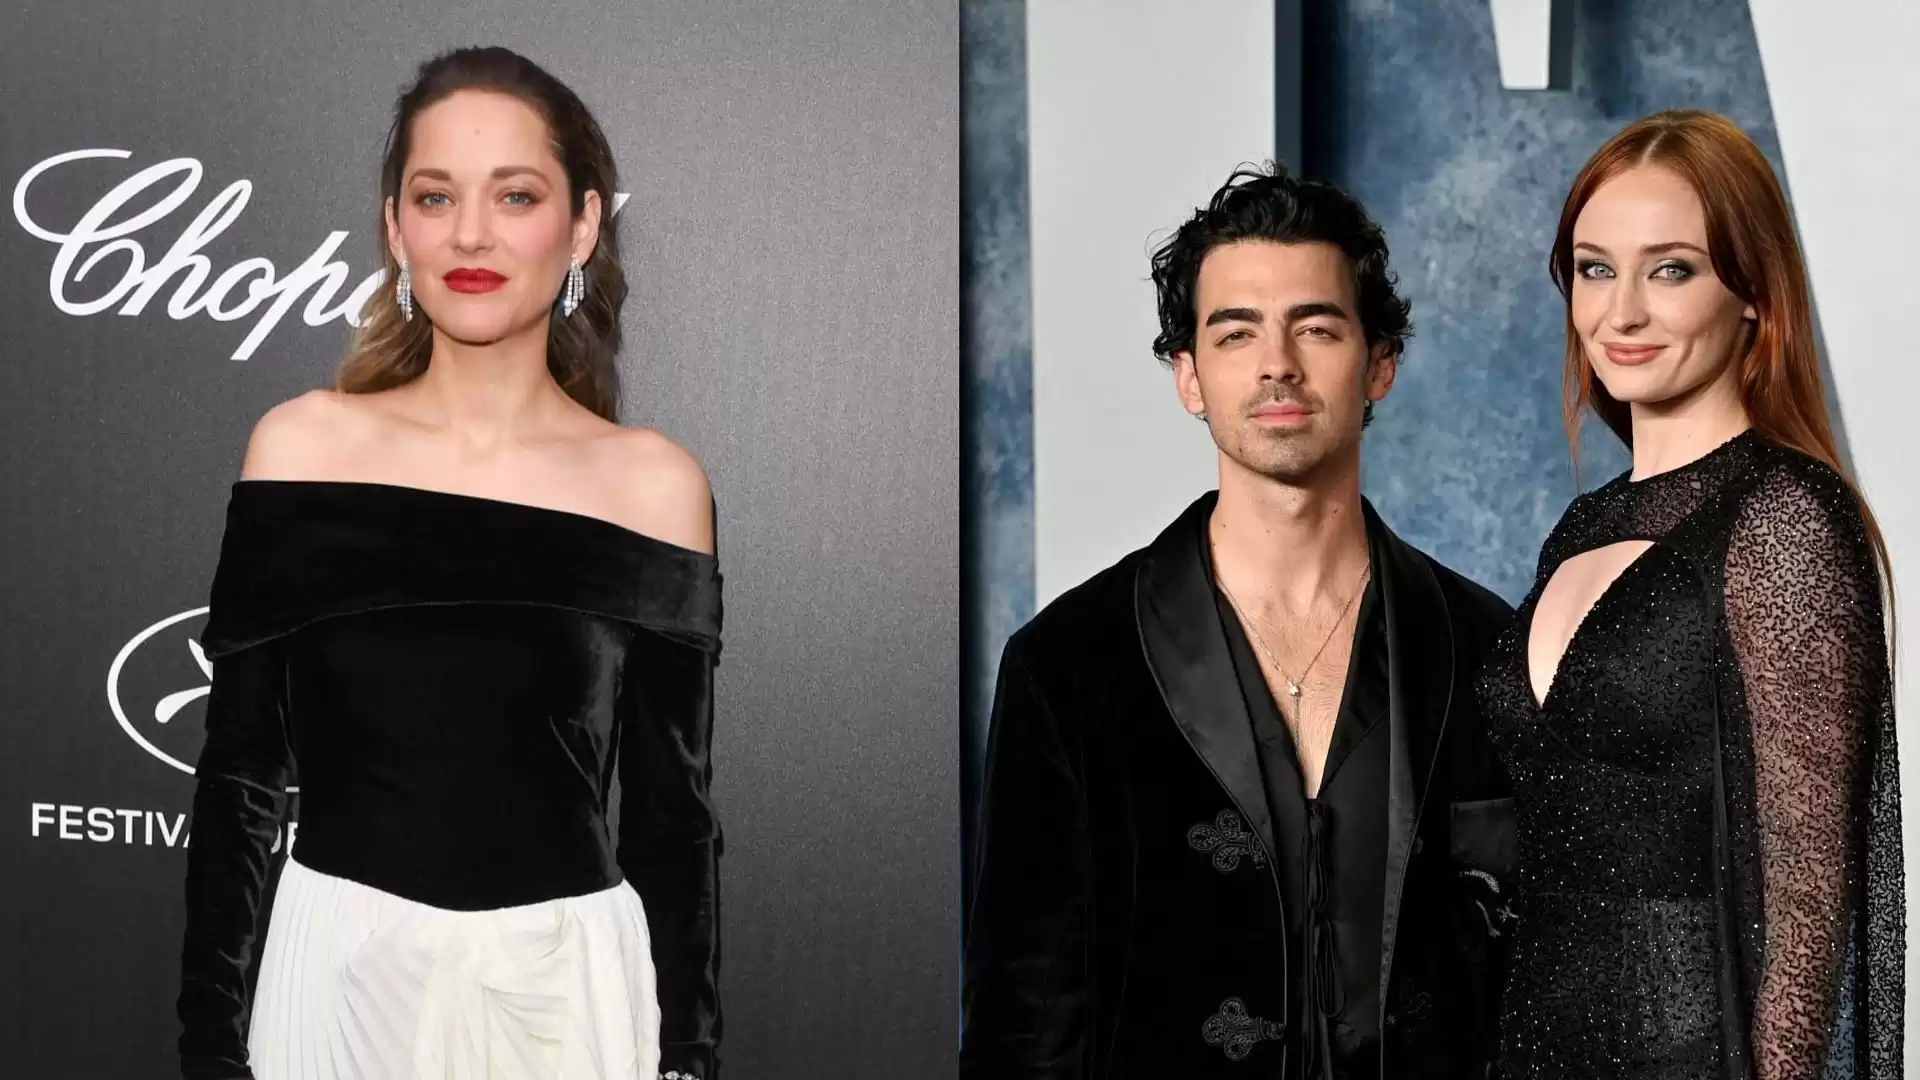 Marion Cotillard's response to Joe Jonas and Sophie Turner divorce claims sparks hilarious reactions